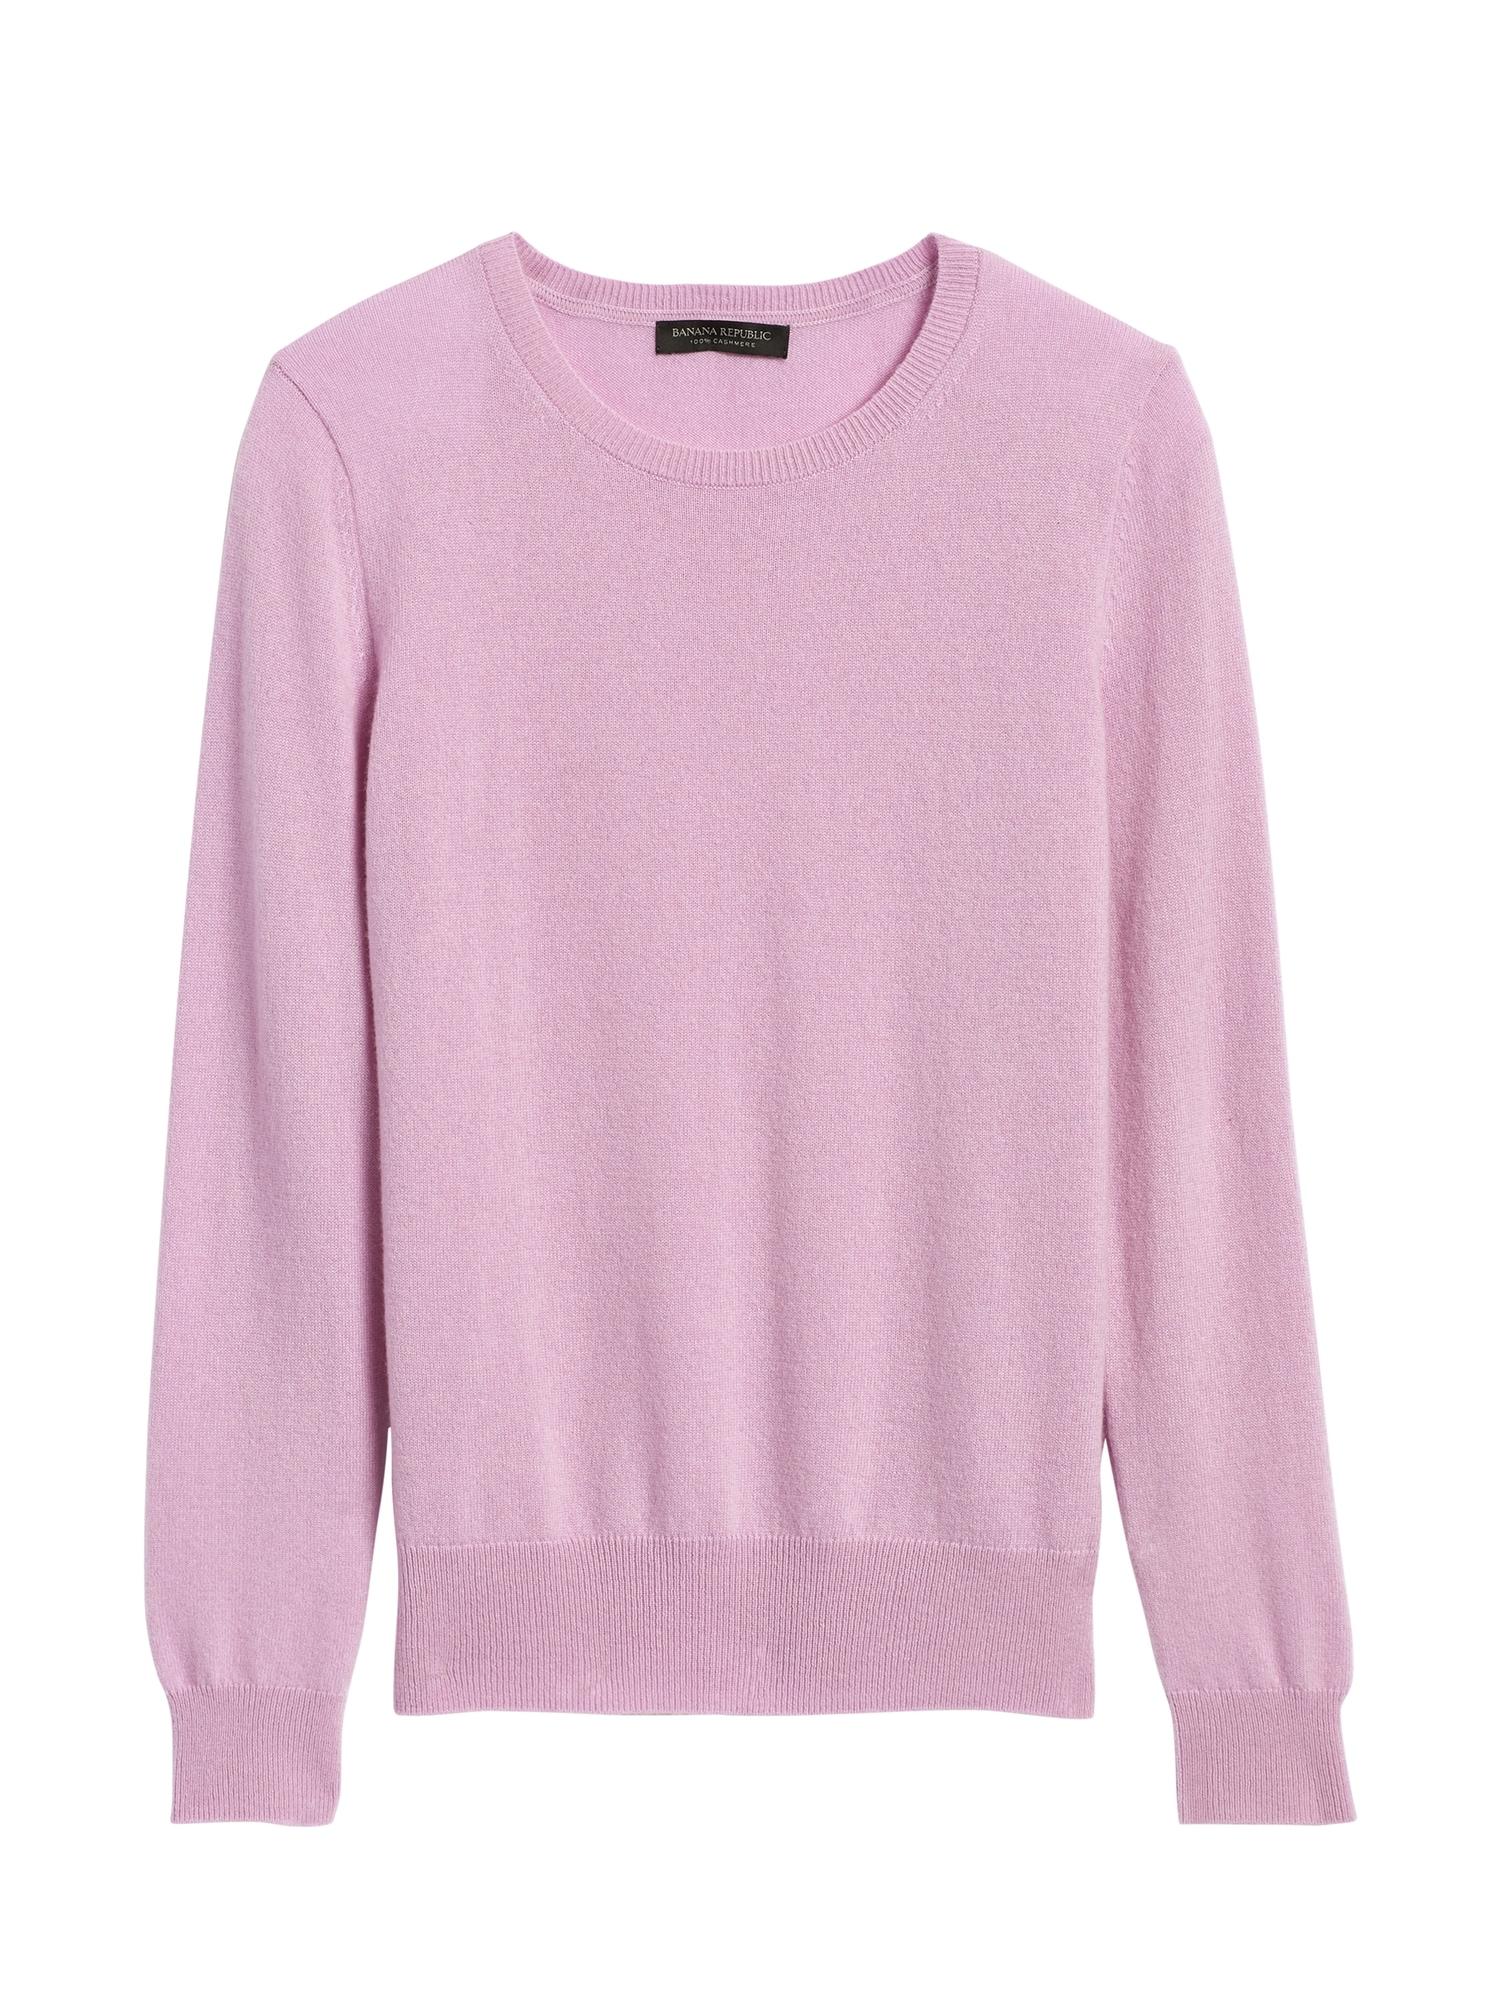 Banana Republic Cashmere Crew-neck Sweater in Pink - Lyst